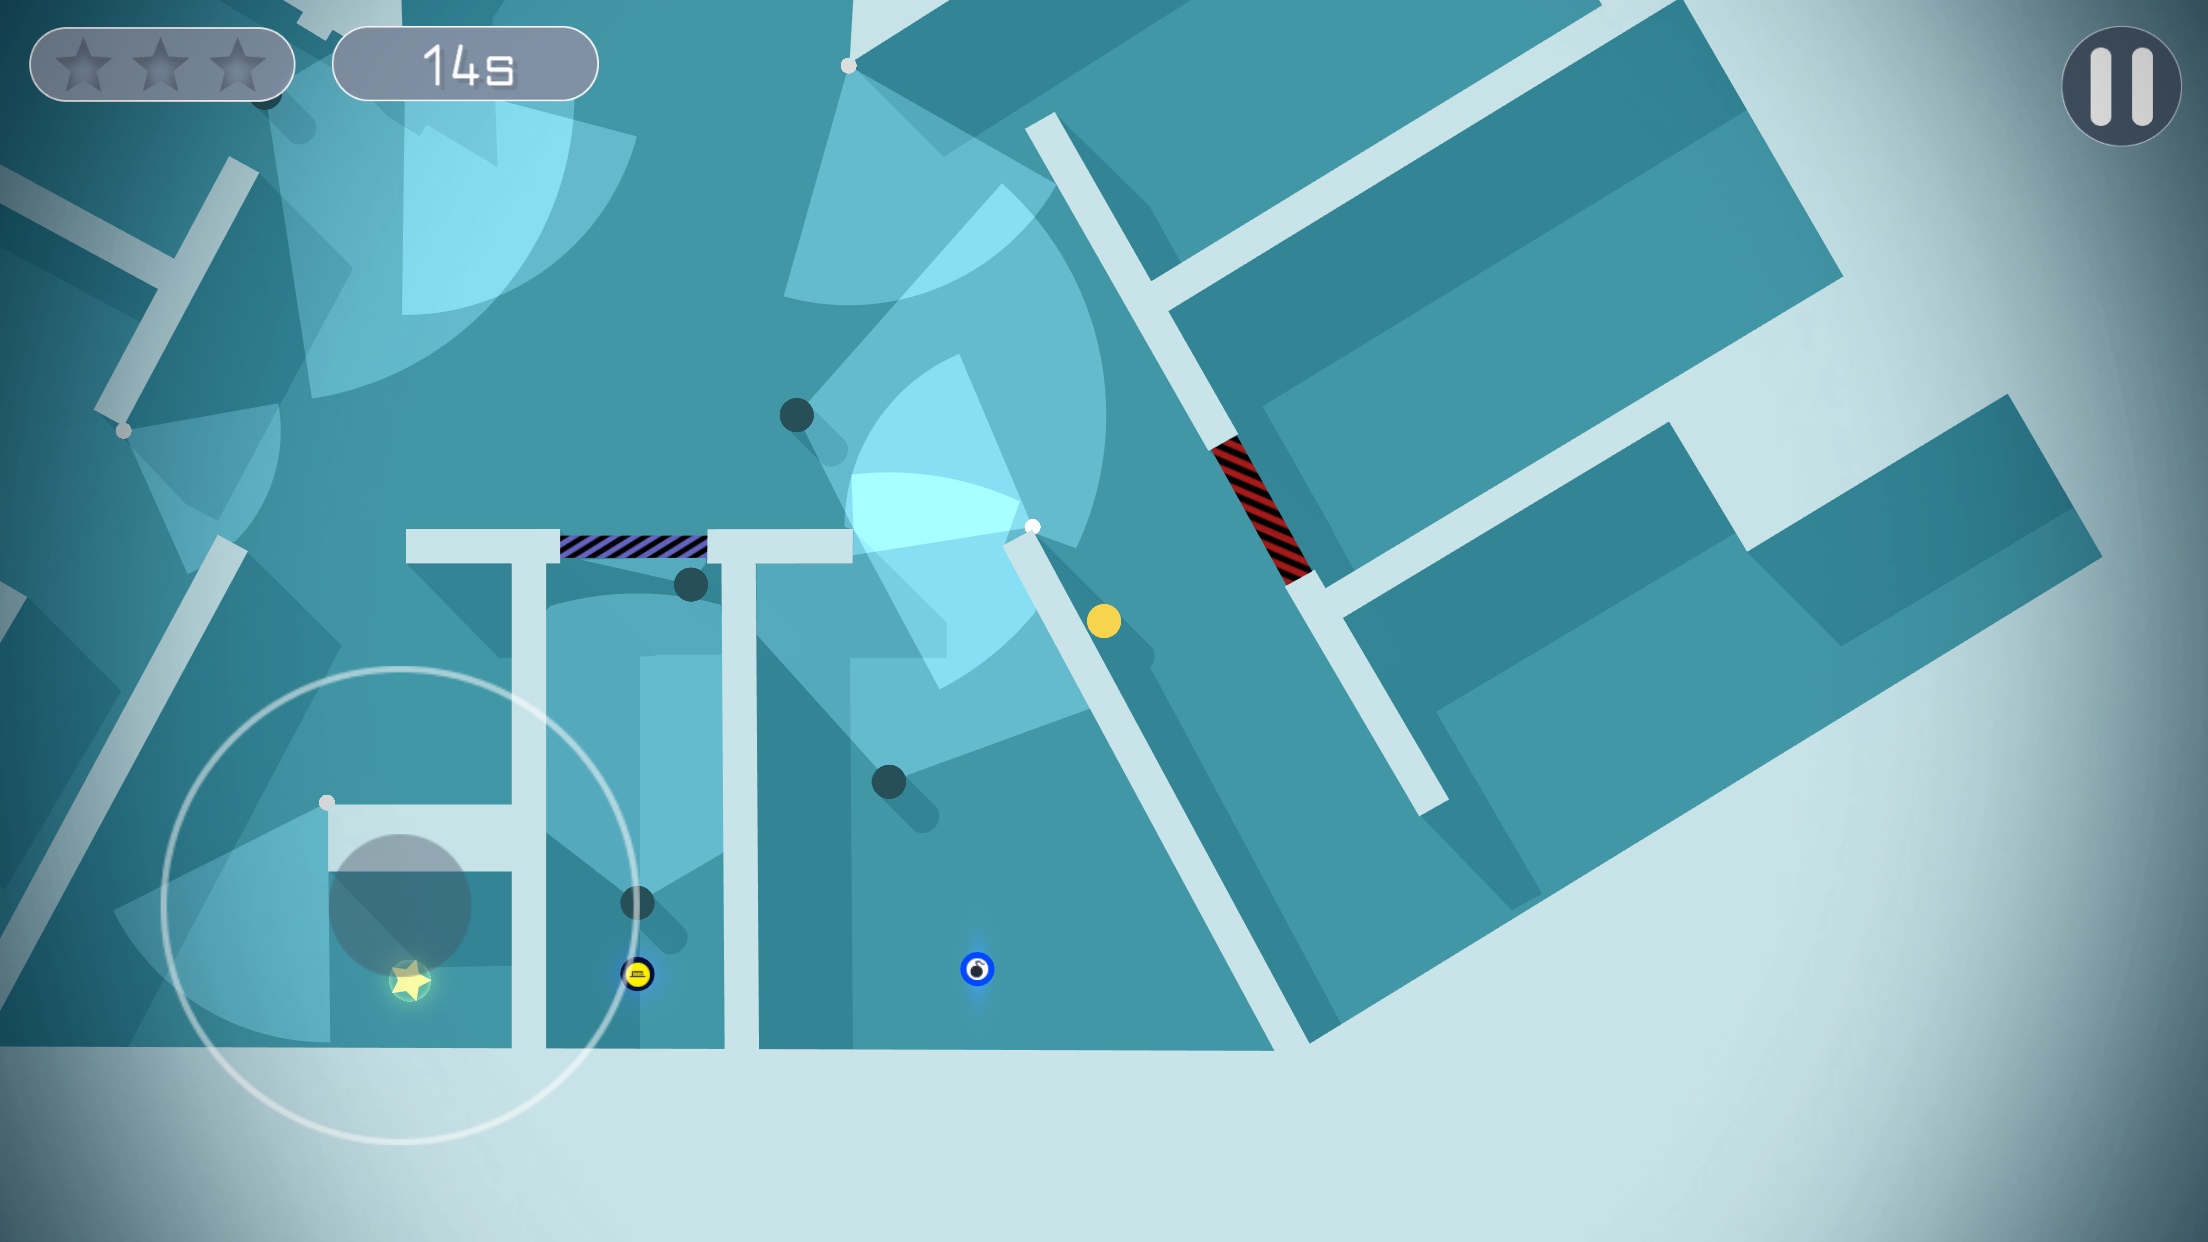 Screenshot 1 of Stealth - puzzle hardcore 1.2.3